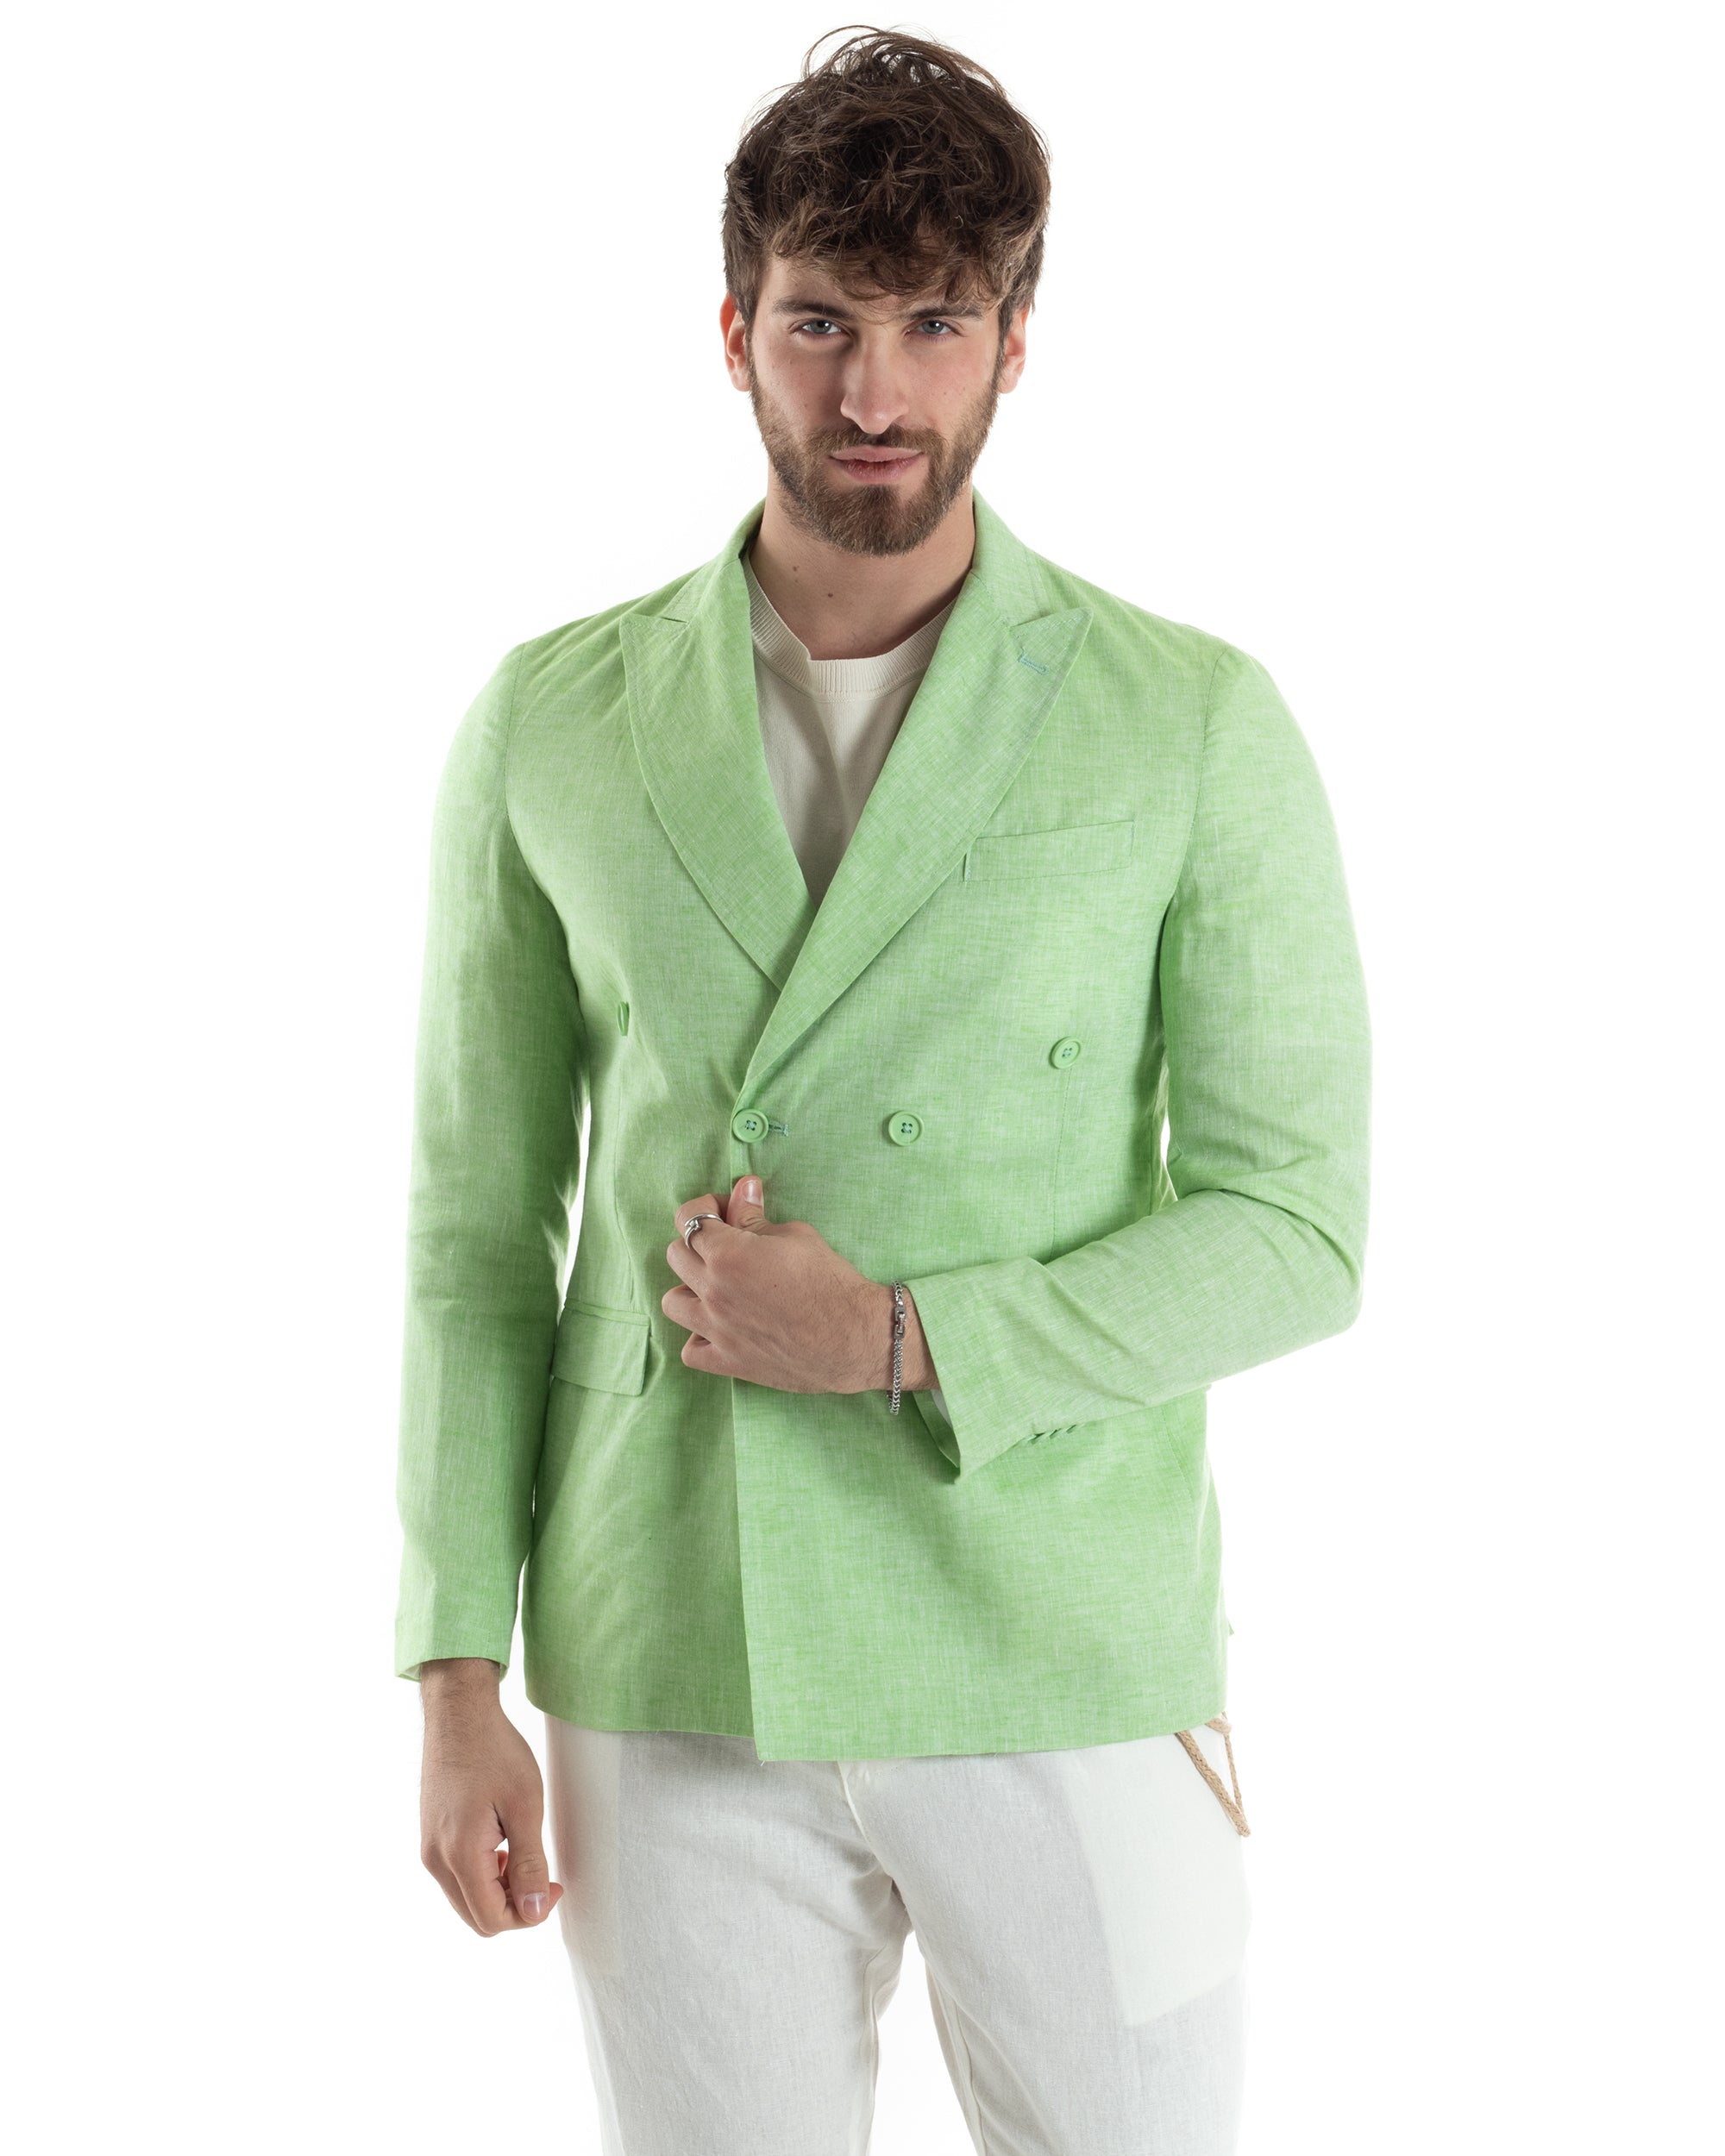 Men's Double-breasted Melange Linen Jacket Ceremony Elegant Casual Mud GIOSAL-G2837A